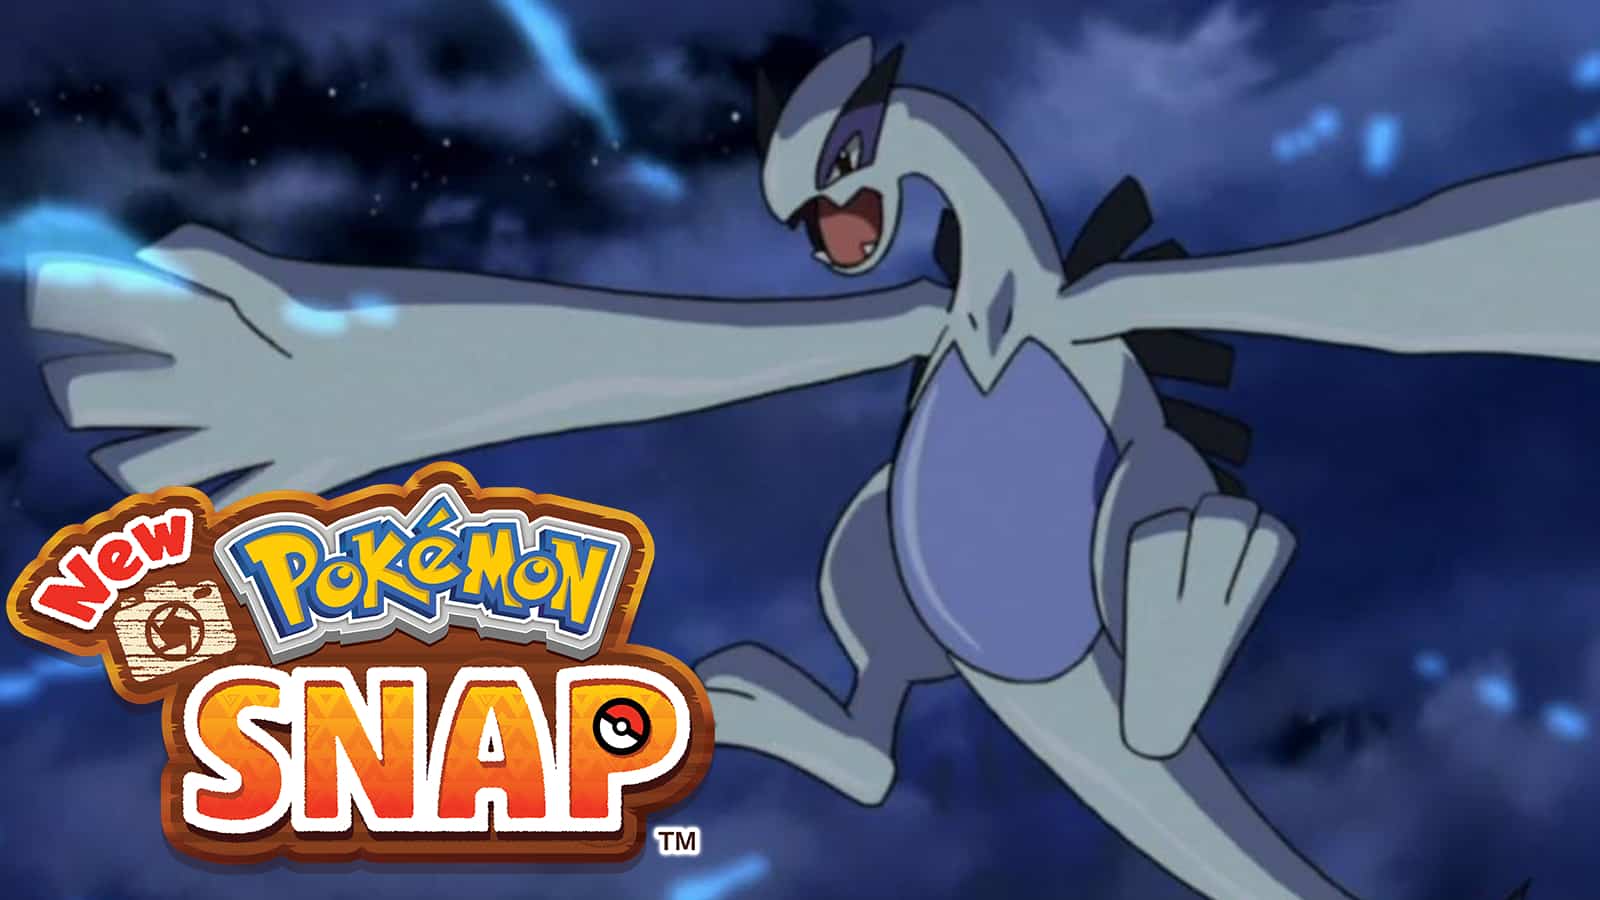 Lugia to appear in New Pokemon Snap roster.